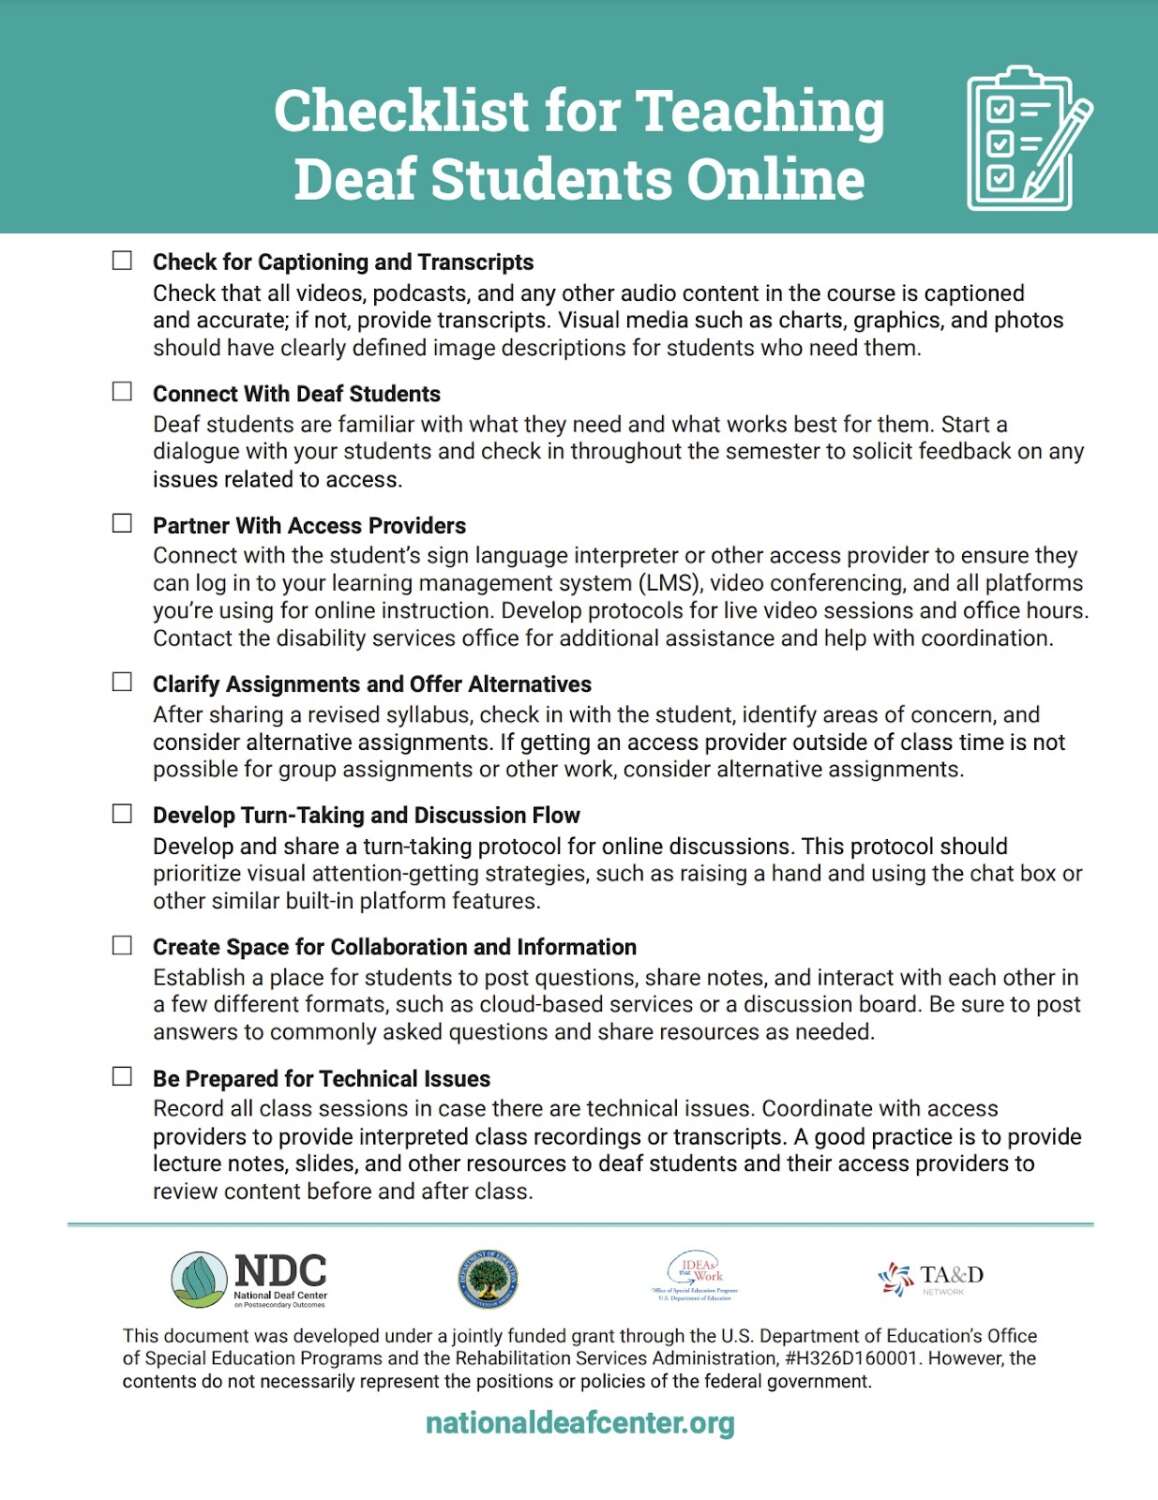 The image is a screenshot of a document titled "Checklist for Teaching Deaf Students Online." It includes guidelines for ensuring accessibility and effective communication with deaf students in an online learning environment. The document outlines steps such as checking for captioning and transcripts, connecting with deaf students, partnering with access providers, clarifying assignments, developing turn-taking and discussion flow, creating space for collaboration and information, and being prepared for technical issues. The document also includes a disclaimer about its development under a jointly funded grant.